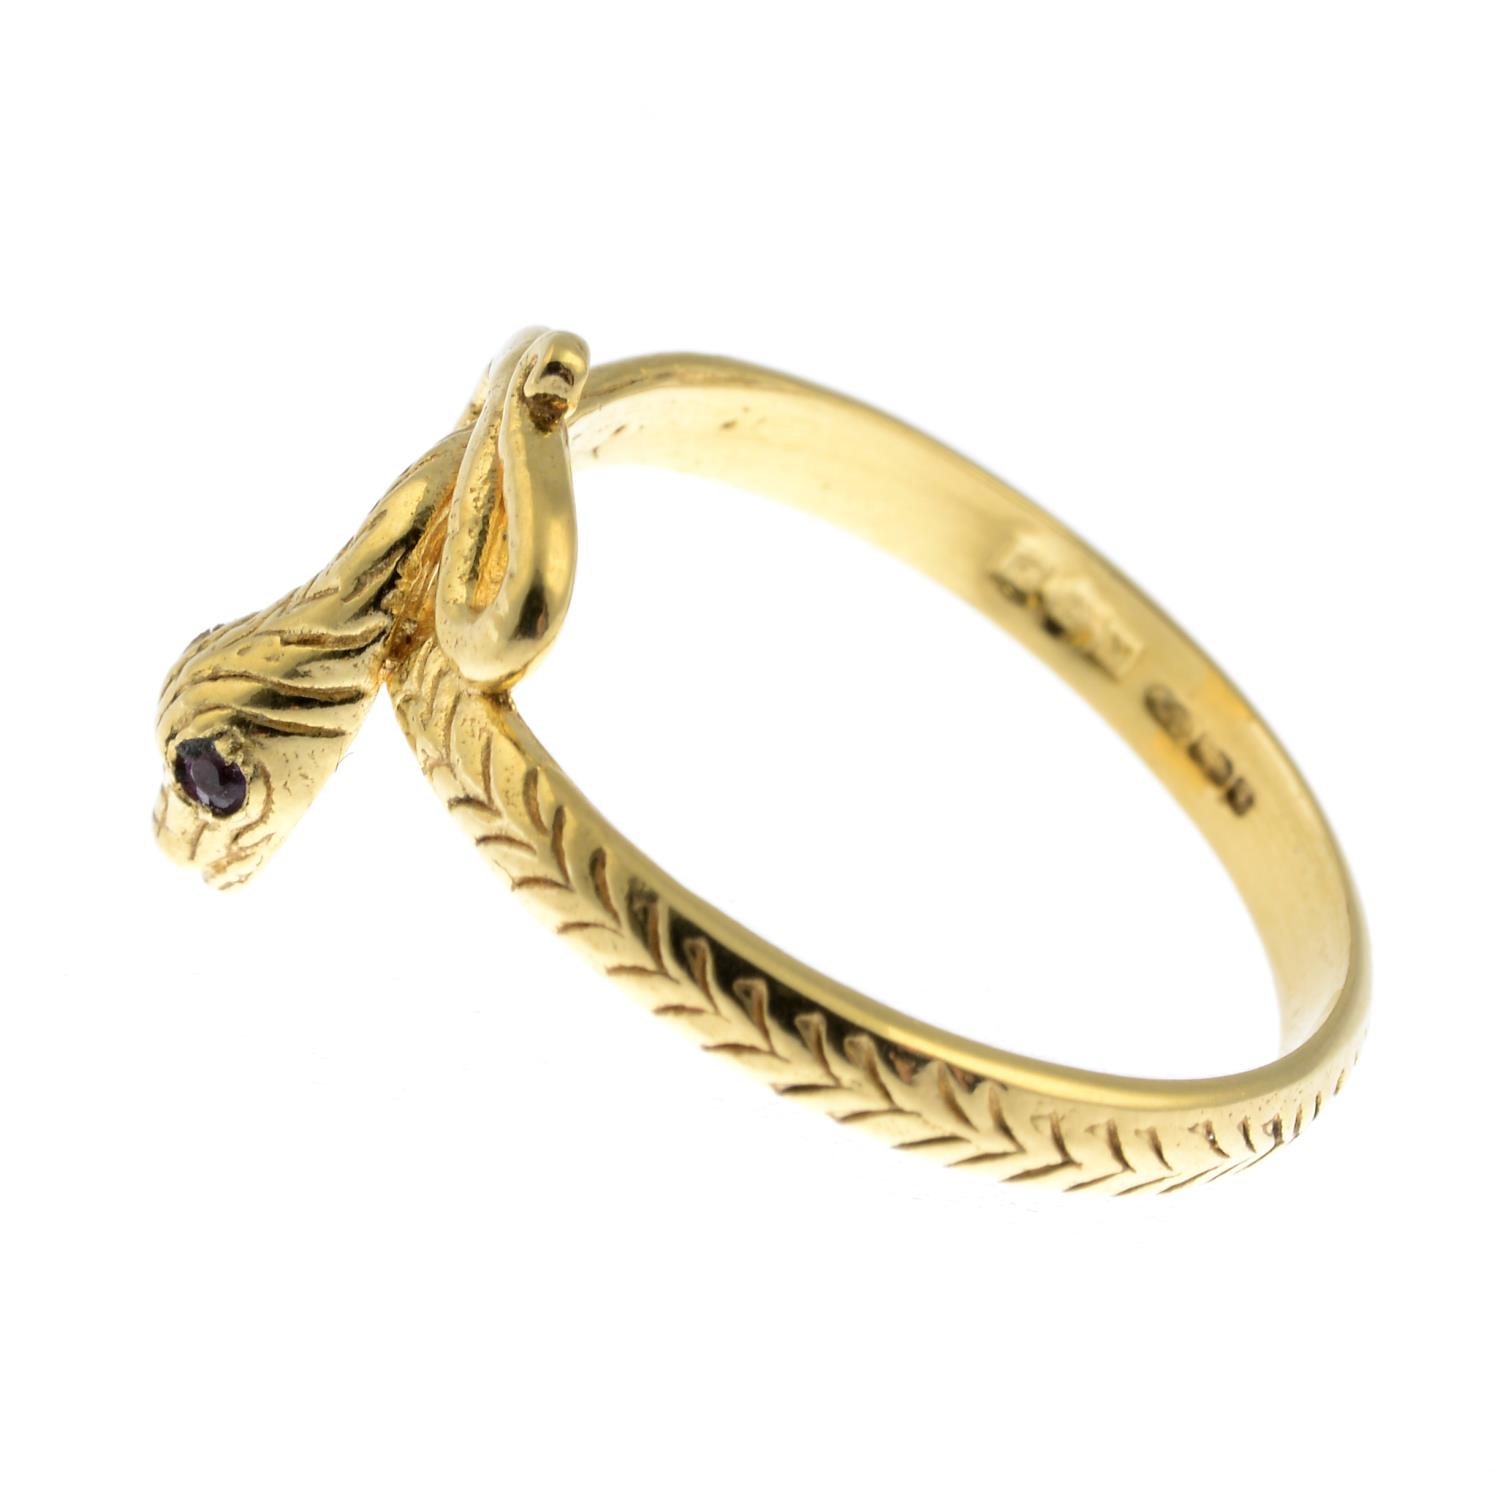 An 18ct gold snake ring, with ruby eyes detail.Hallmarks for 18ct gold. - Image 3 of 3